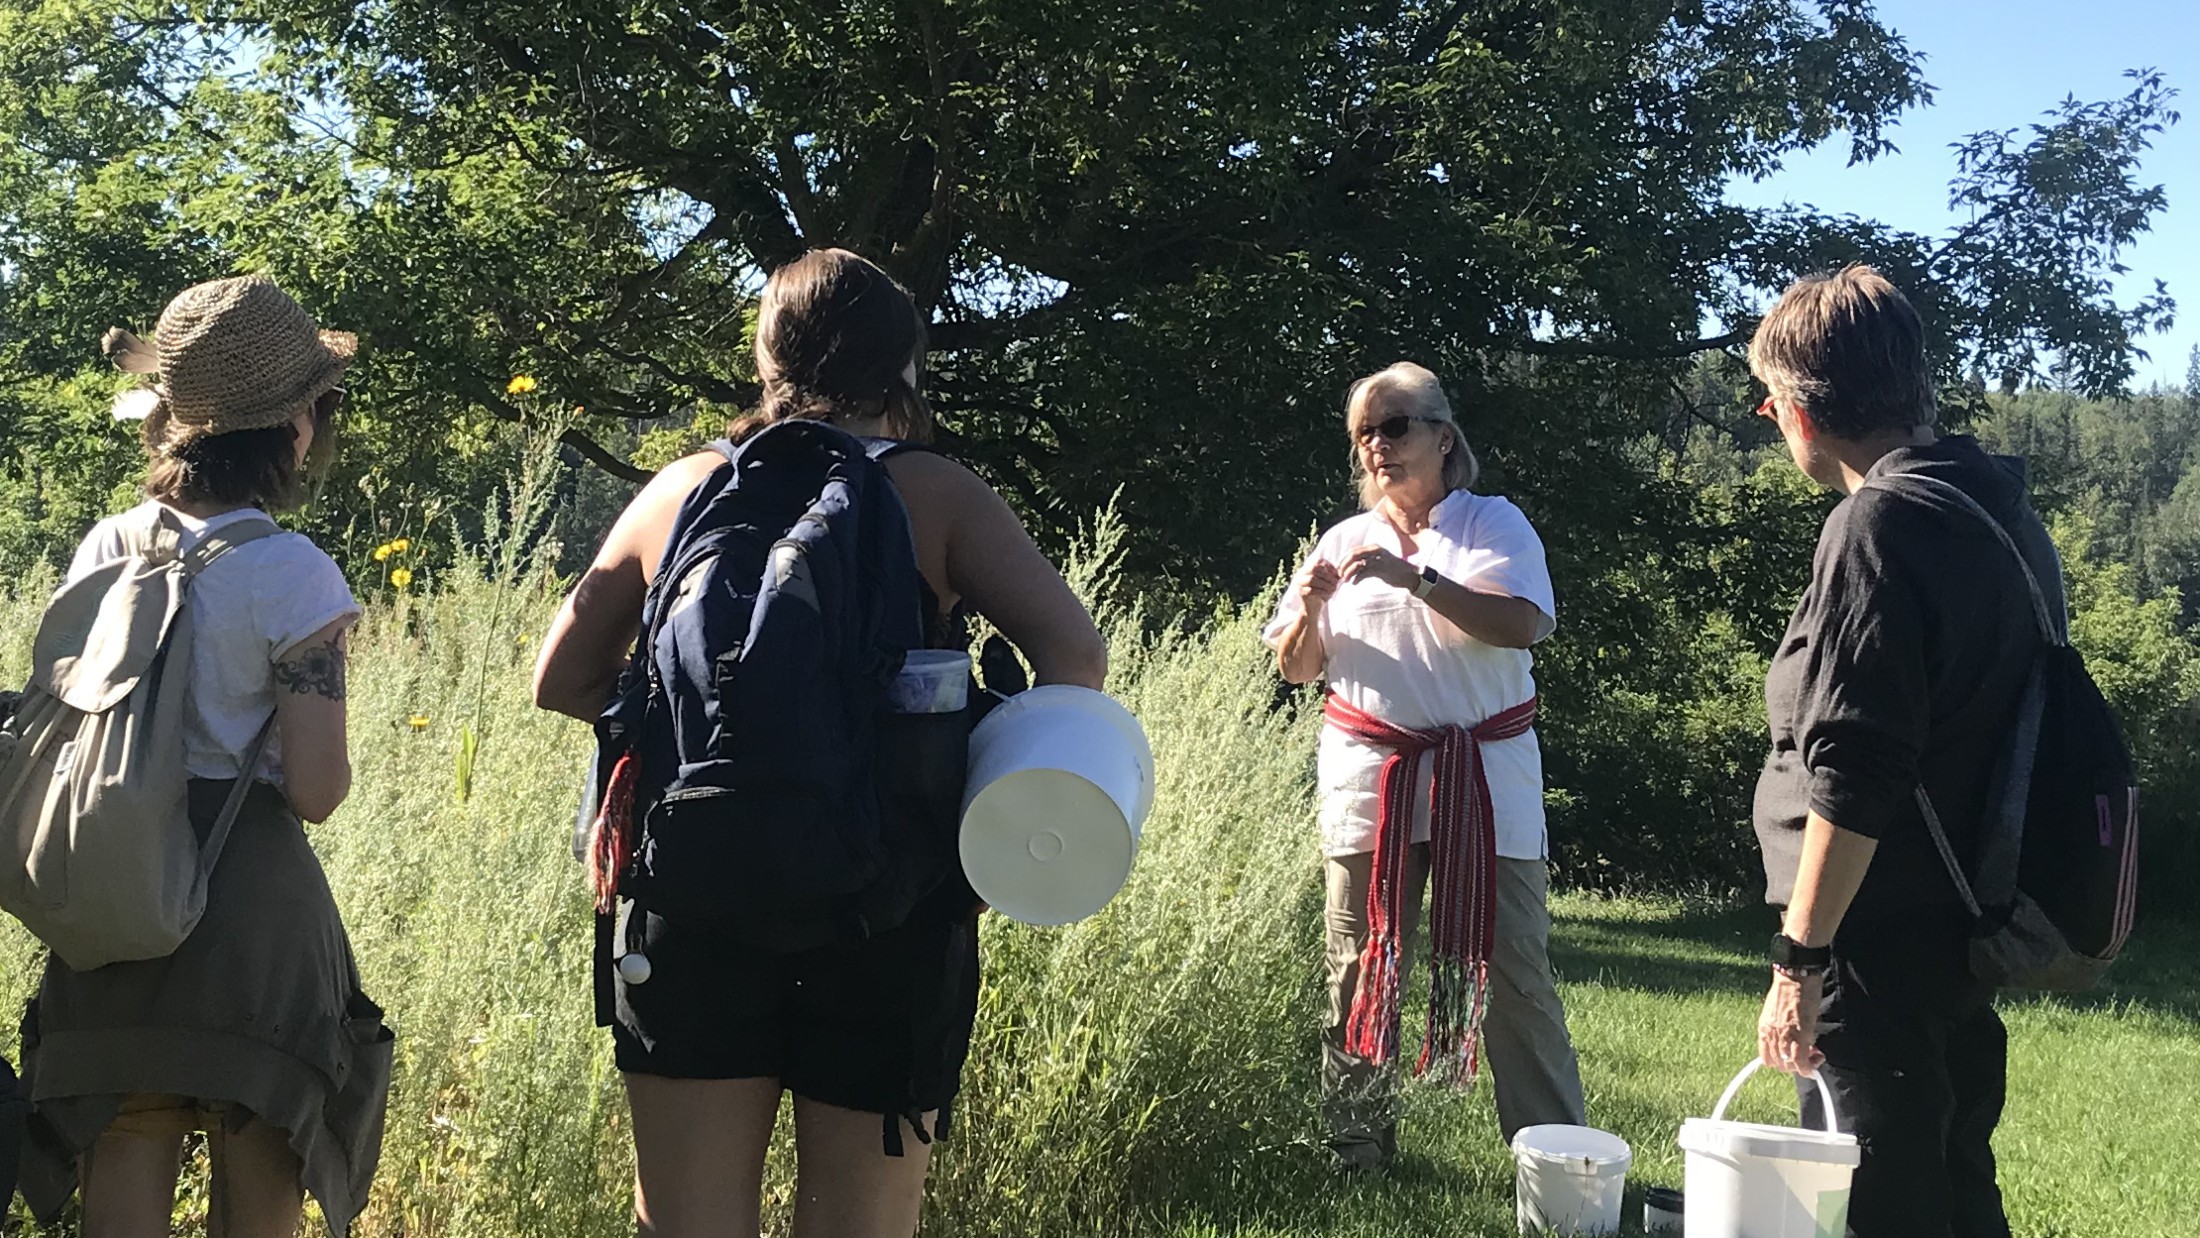 Métis Elder Lilyrose Meyers guides U of A Native studies students in a harvesting exercise during a week of land-based learning at Métis Crossing.